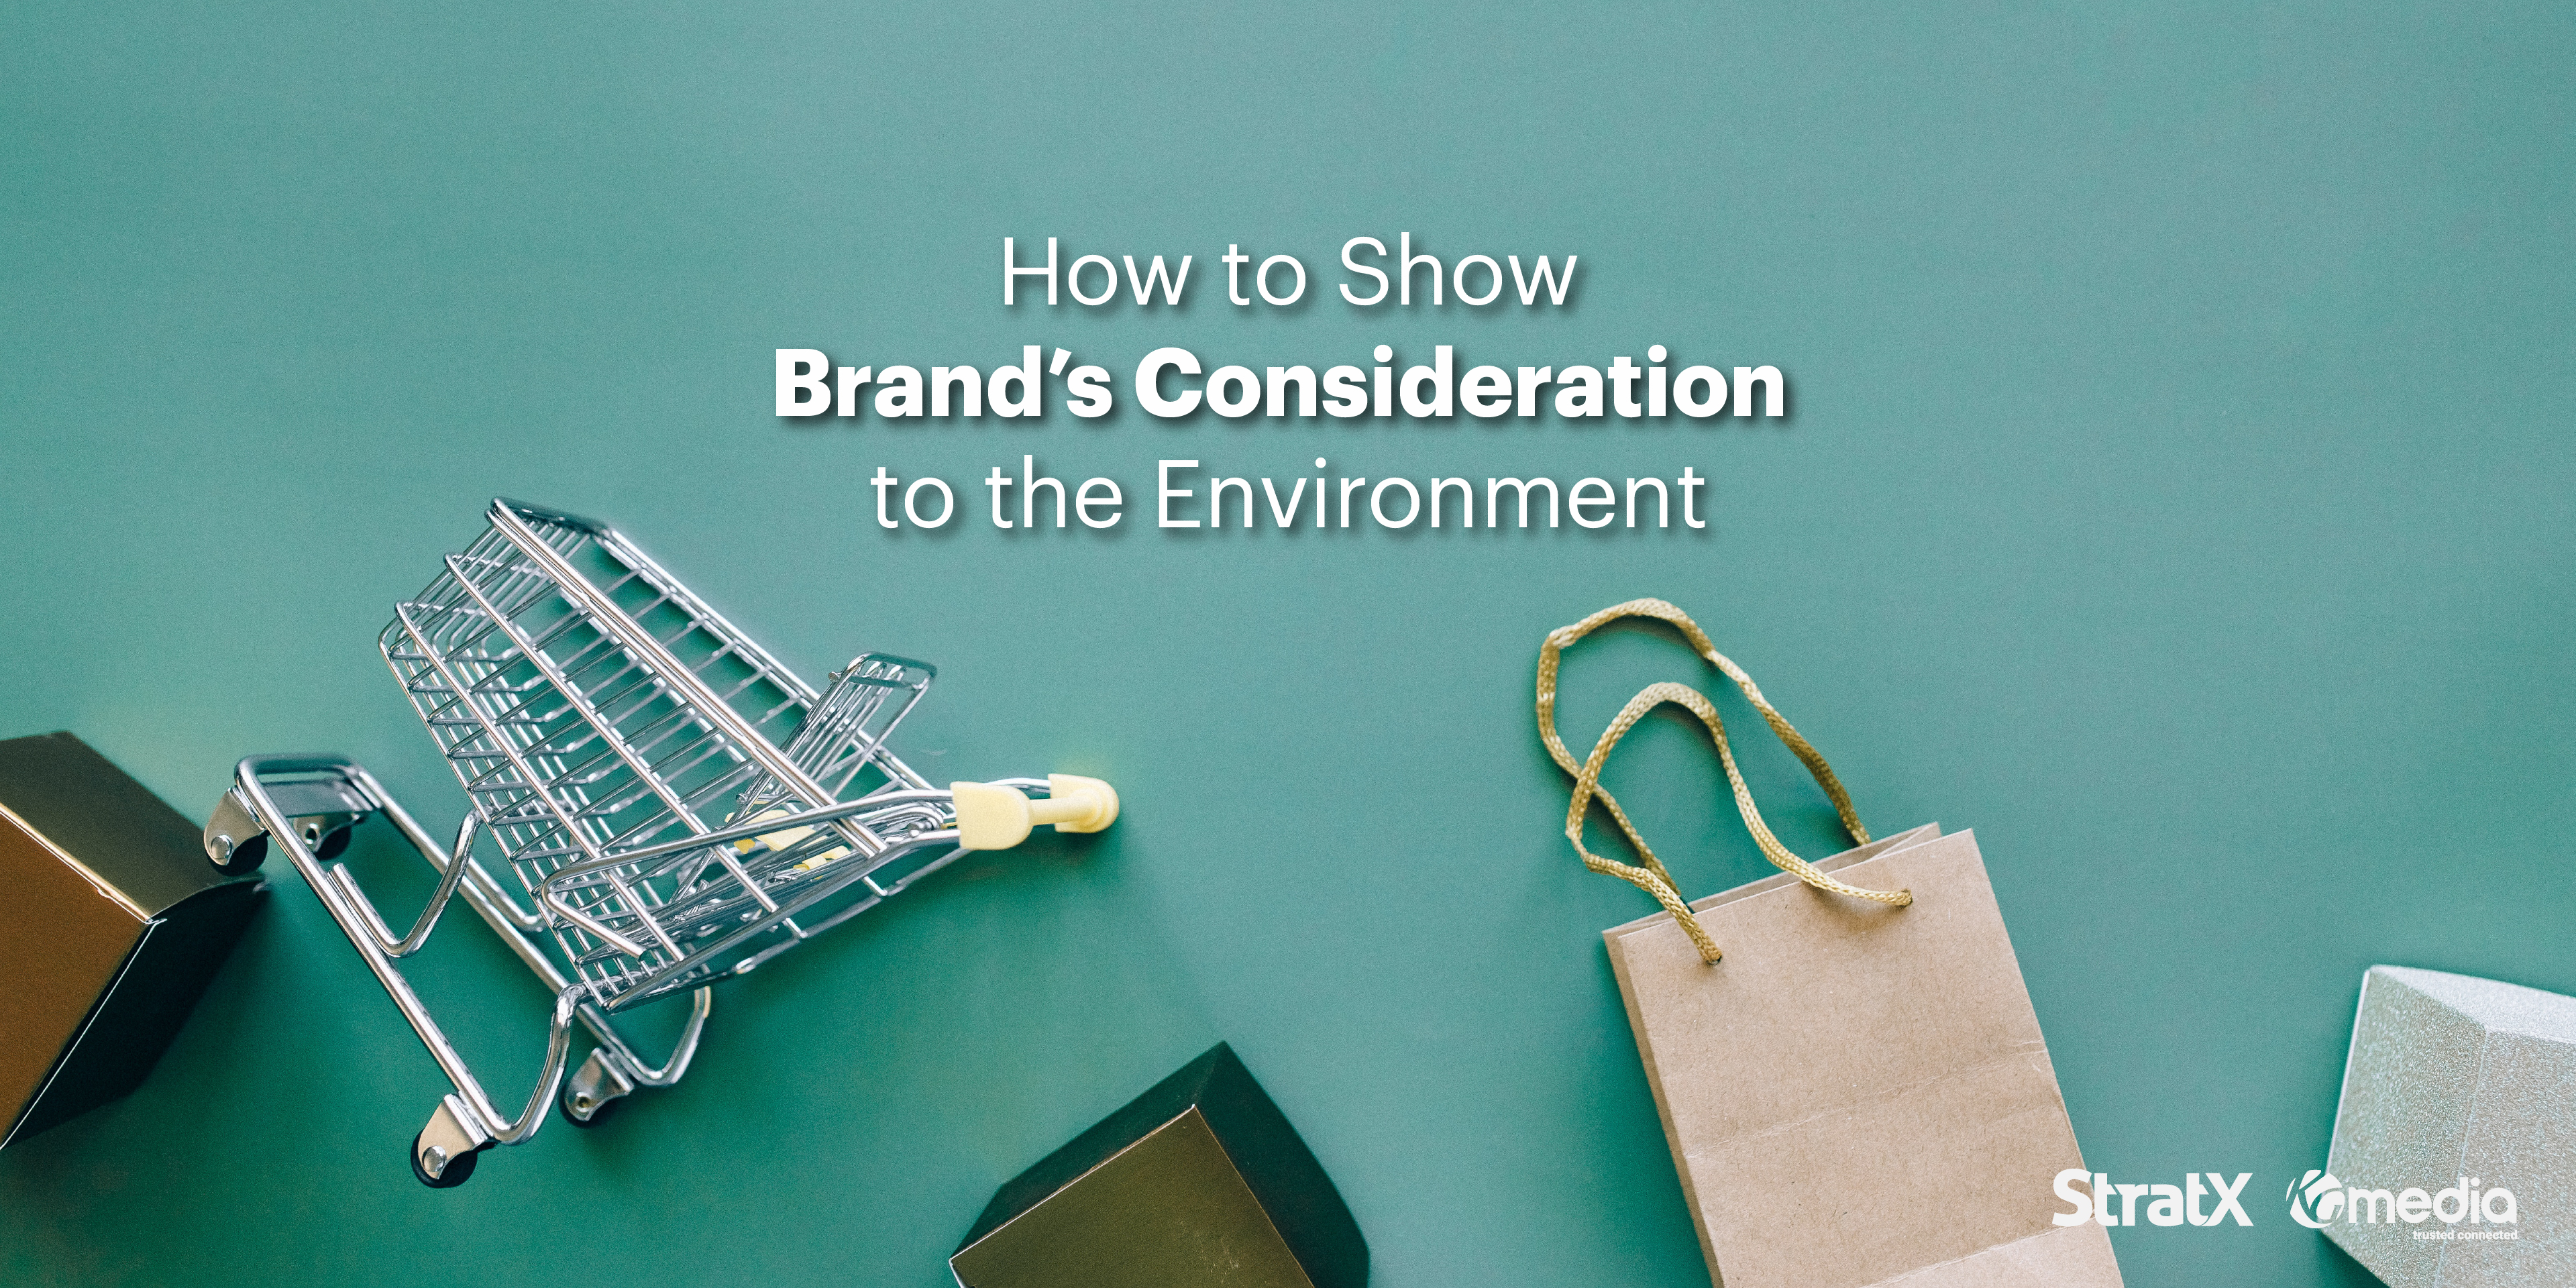 Brands can win the heart of audience by showing their efforts to save the environment